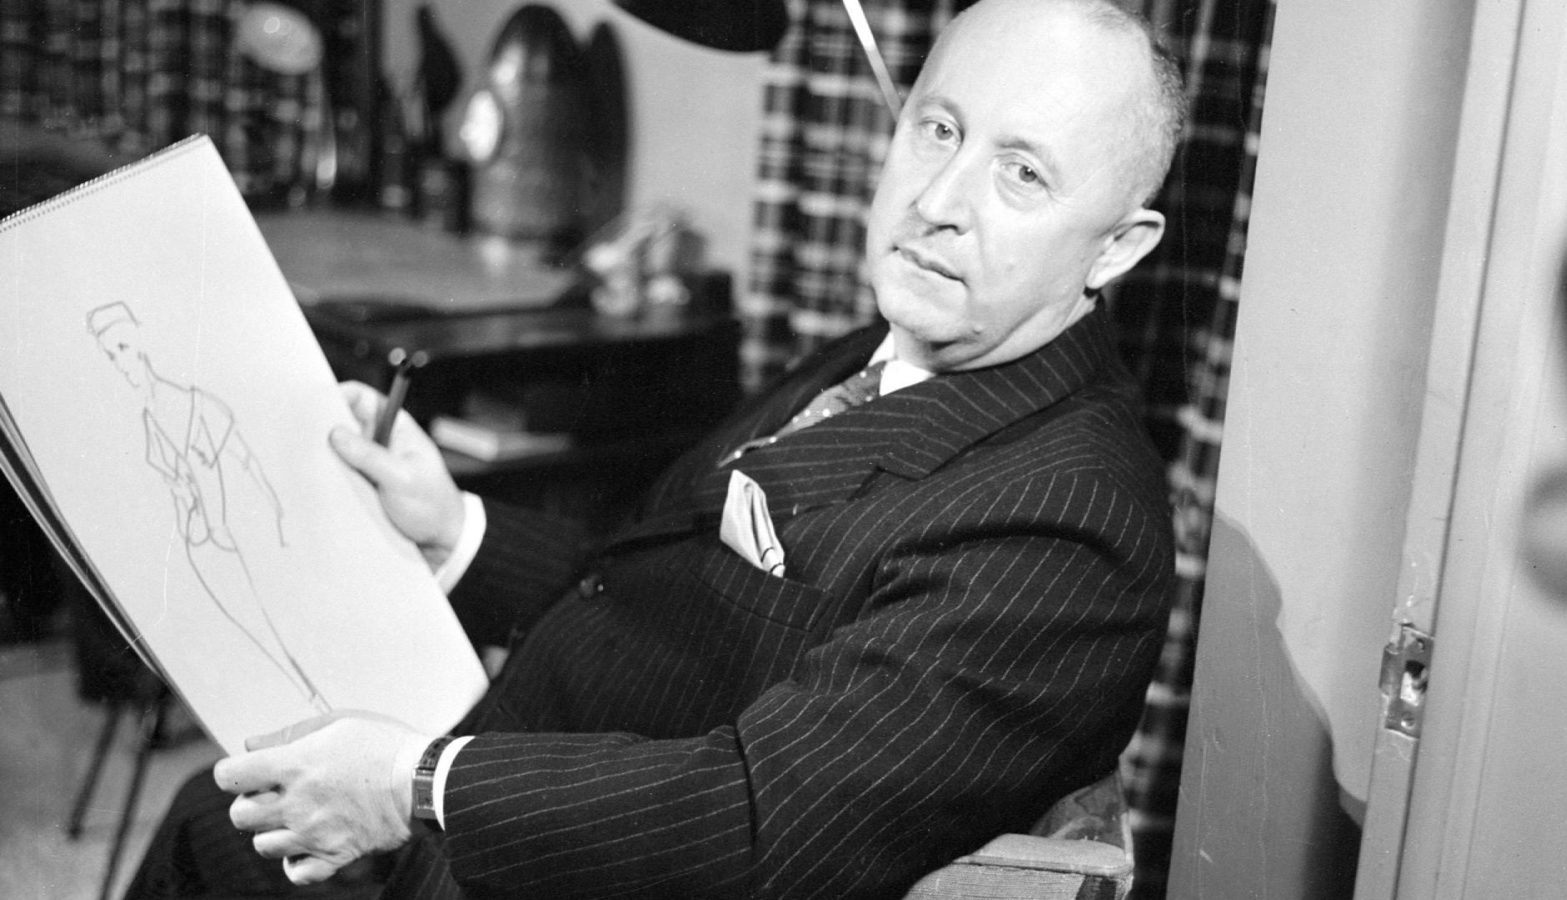 Watch: Christian Dior shares his secrets in a rare documentary